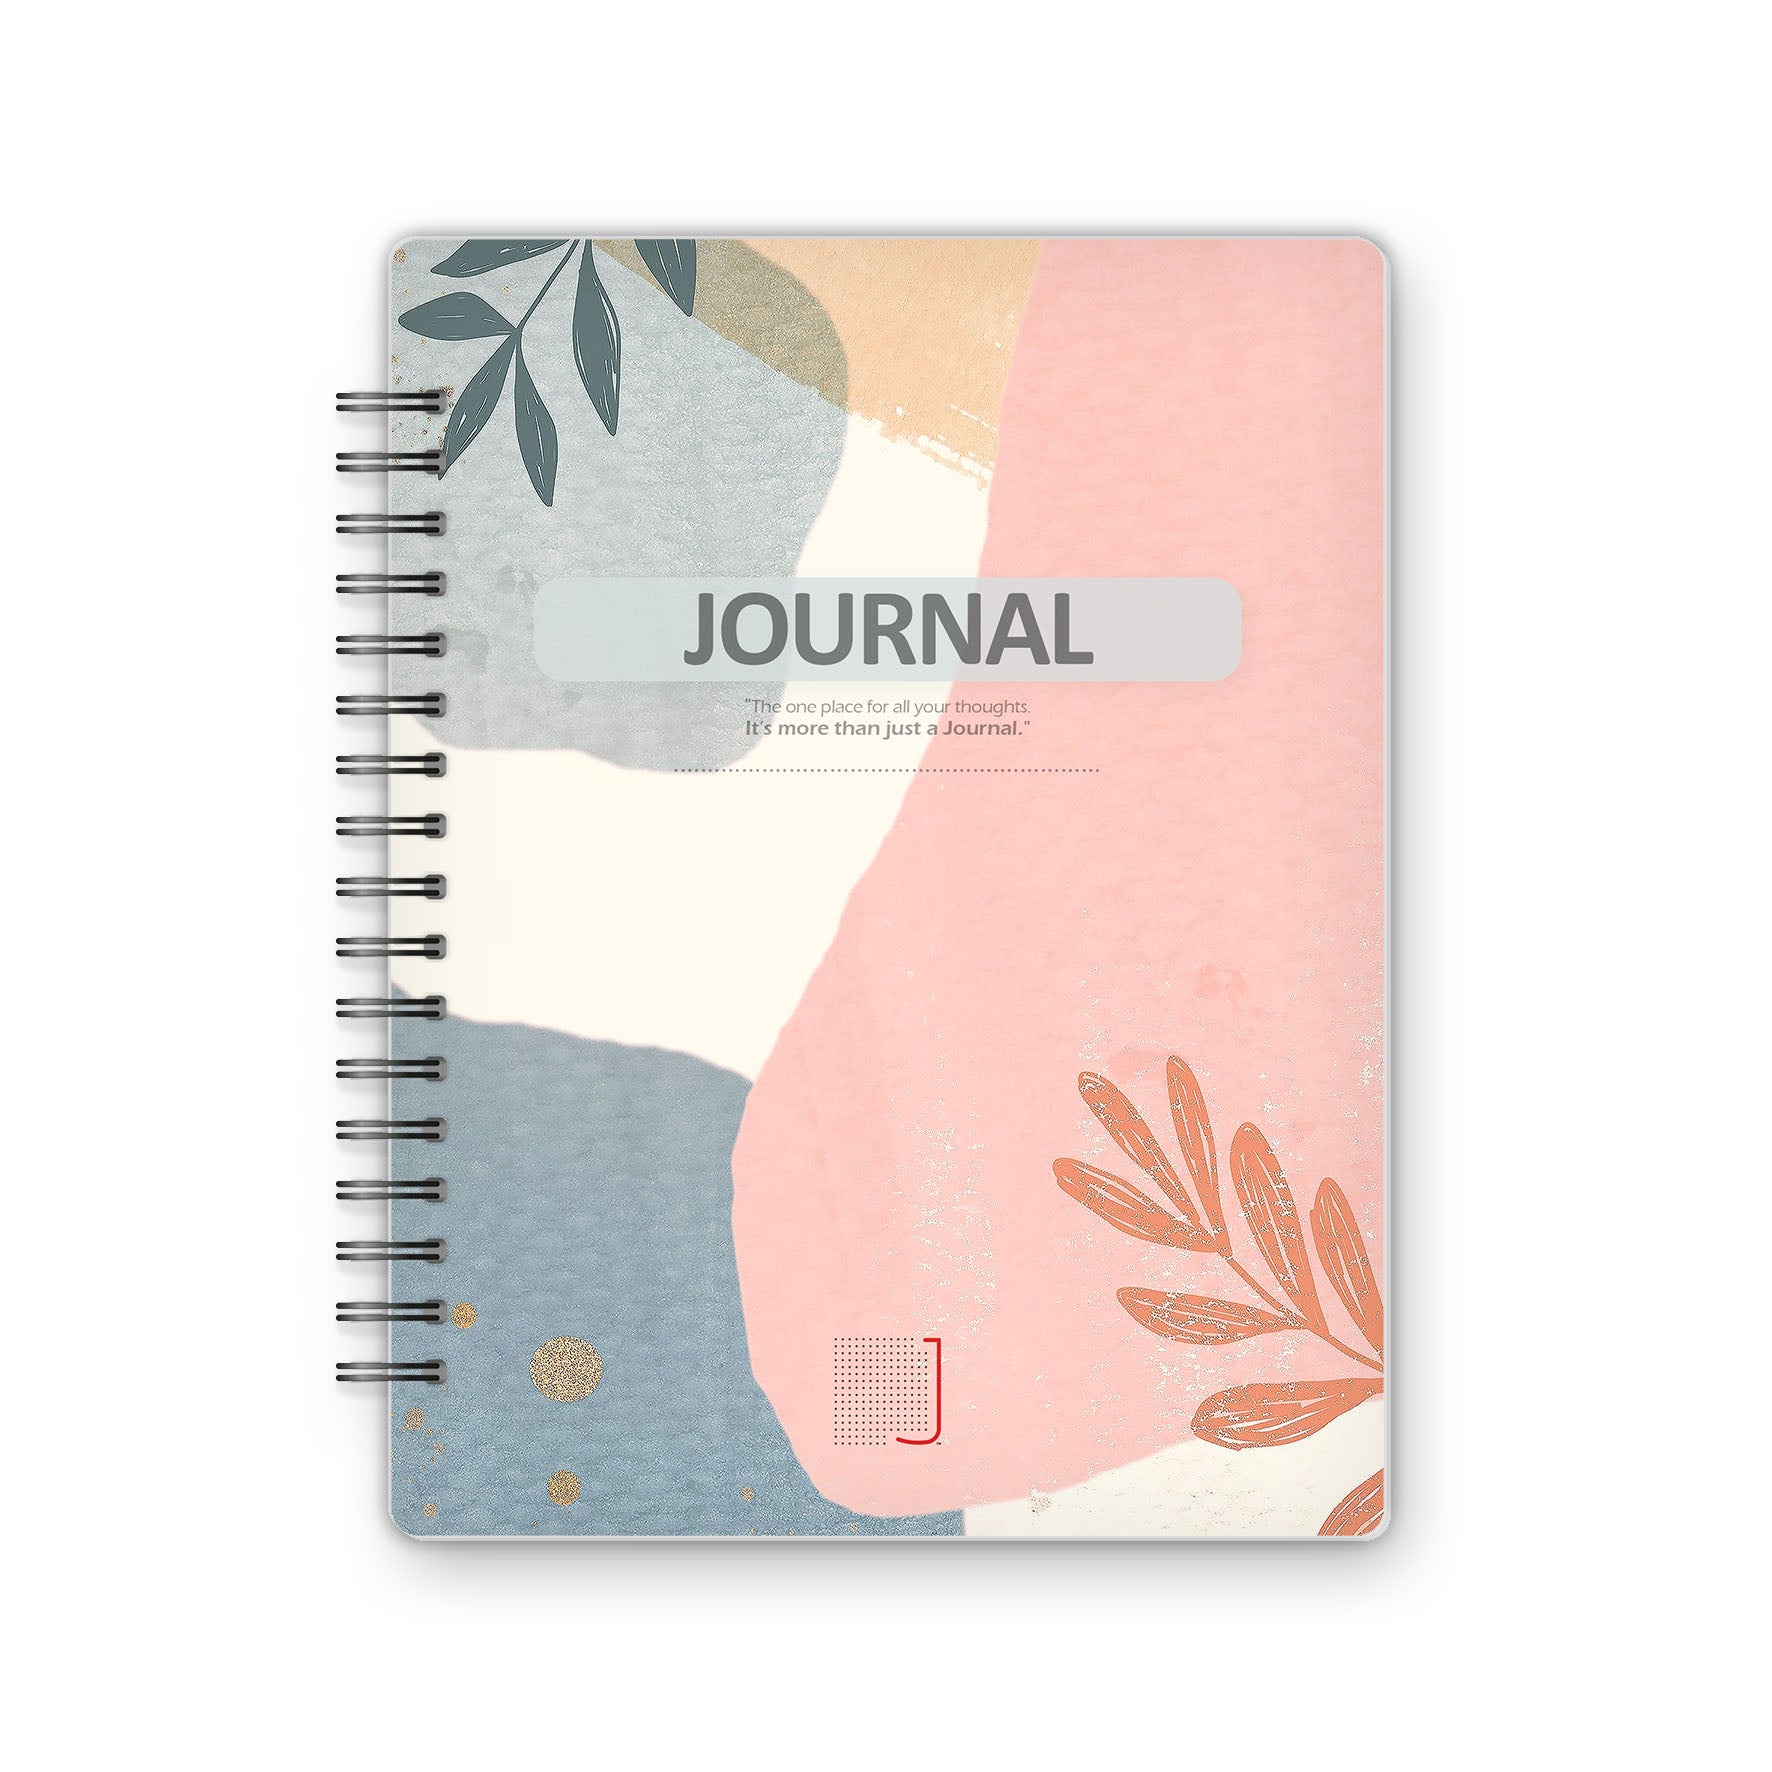 Journal - 18X14 cm - 75 Sheets | Pink Leaf 01 - from Journals